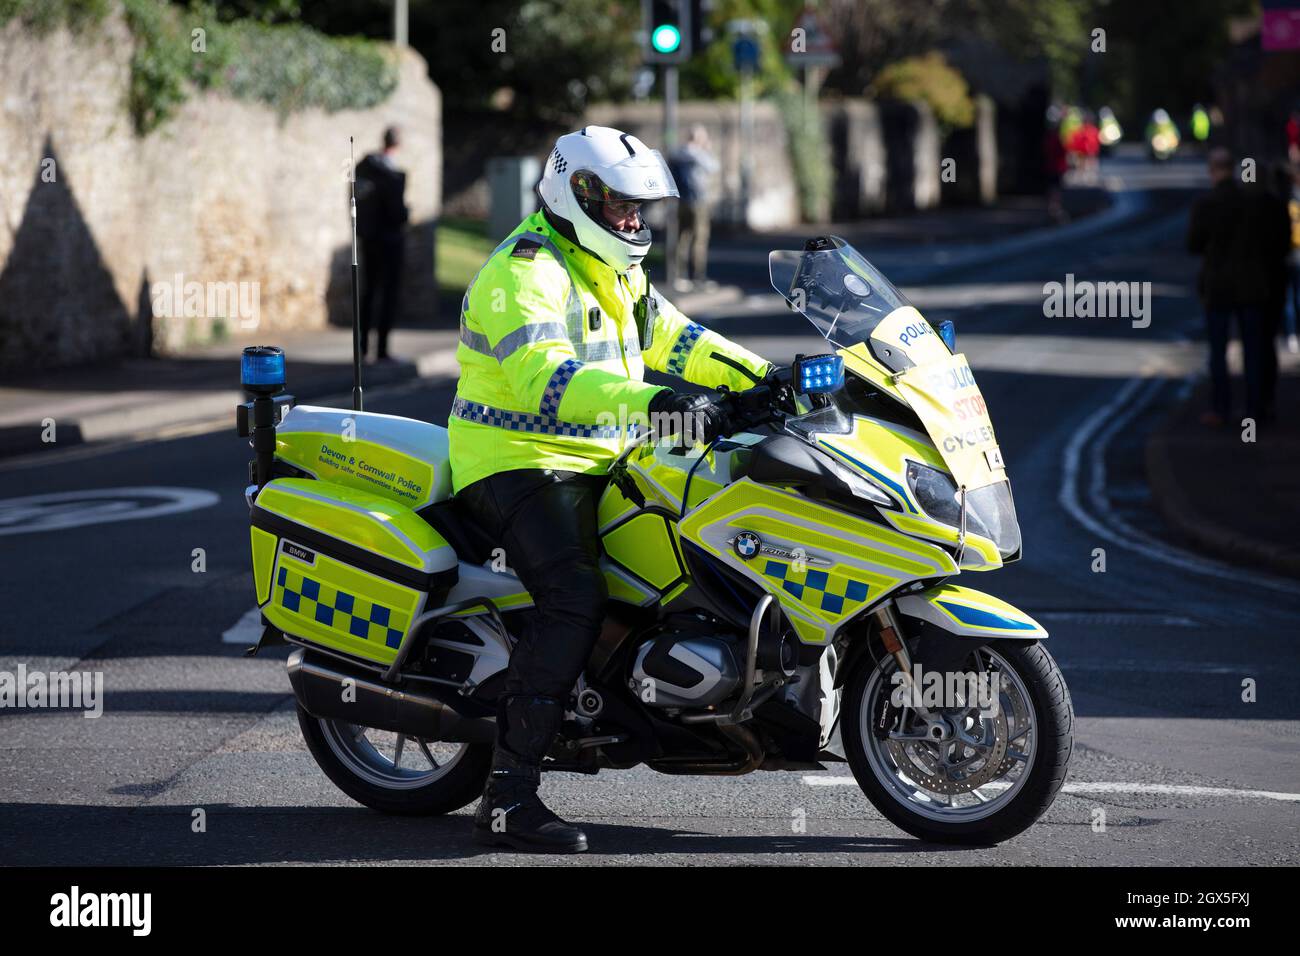 Bicester, UK - October 2021: Police motorbike rider blocks a road during an event Stock Photo